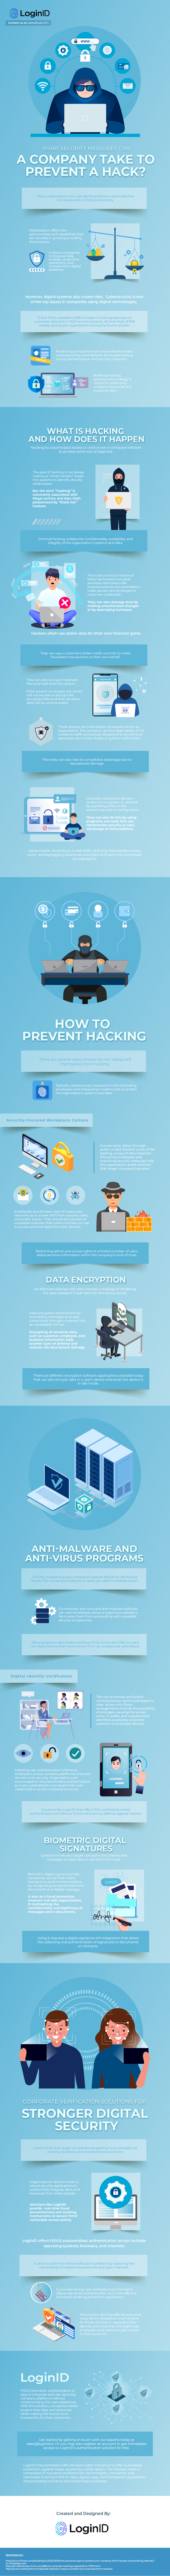 What-Security-Measures-Can-a-Company-Take-to-Prevent-a-Hack?-infographic-image-HDIA